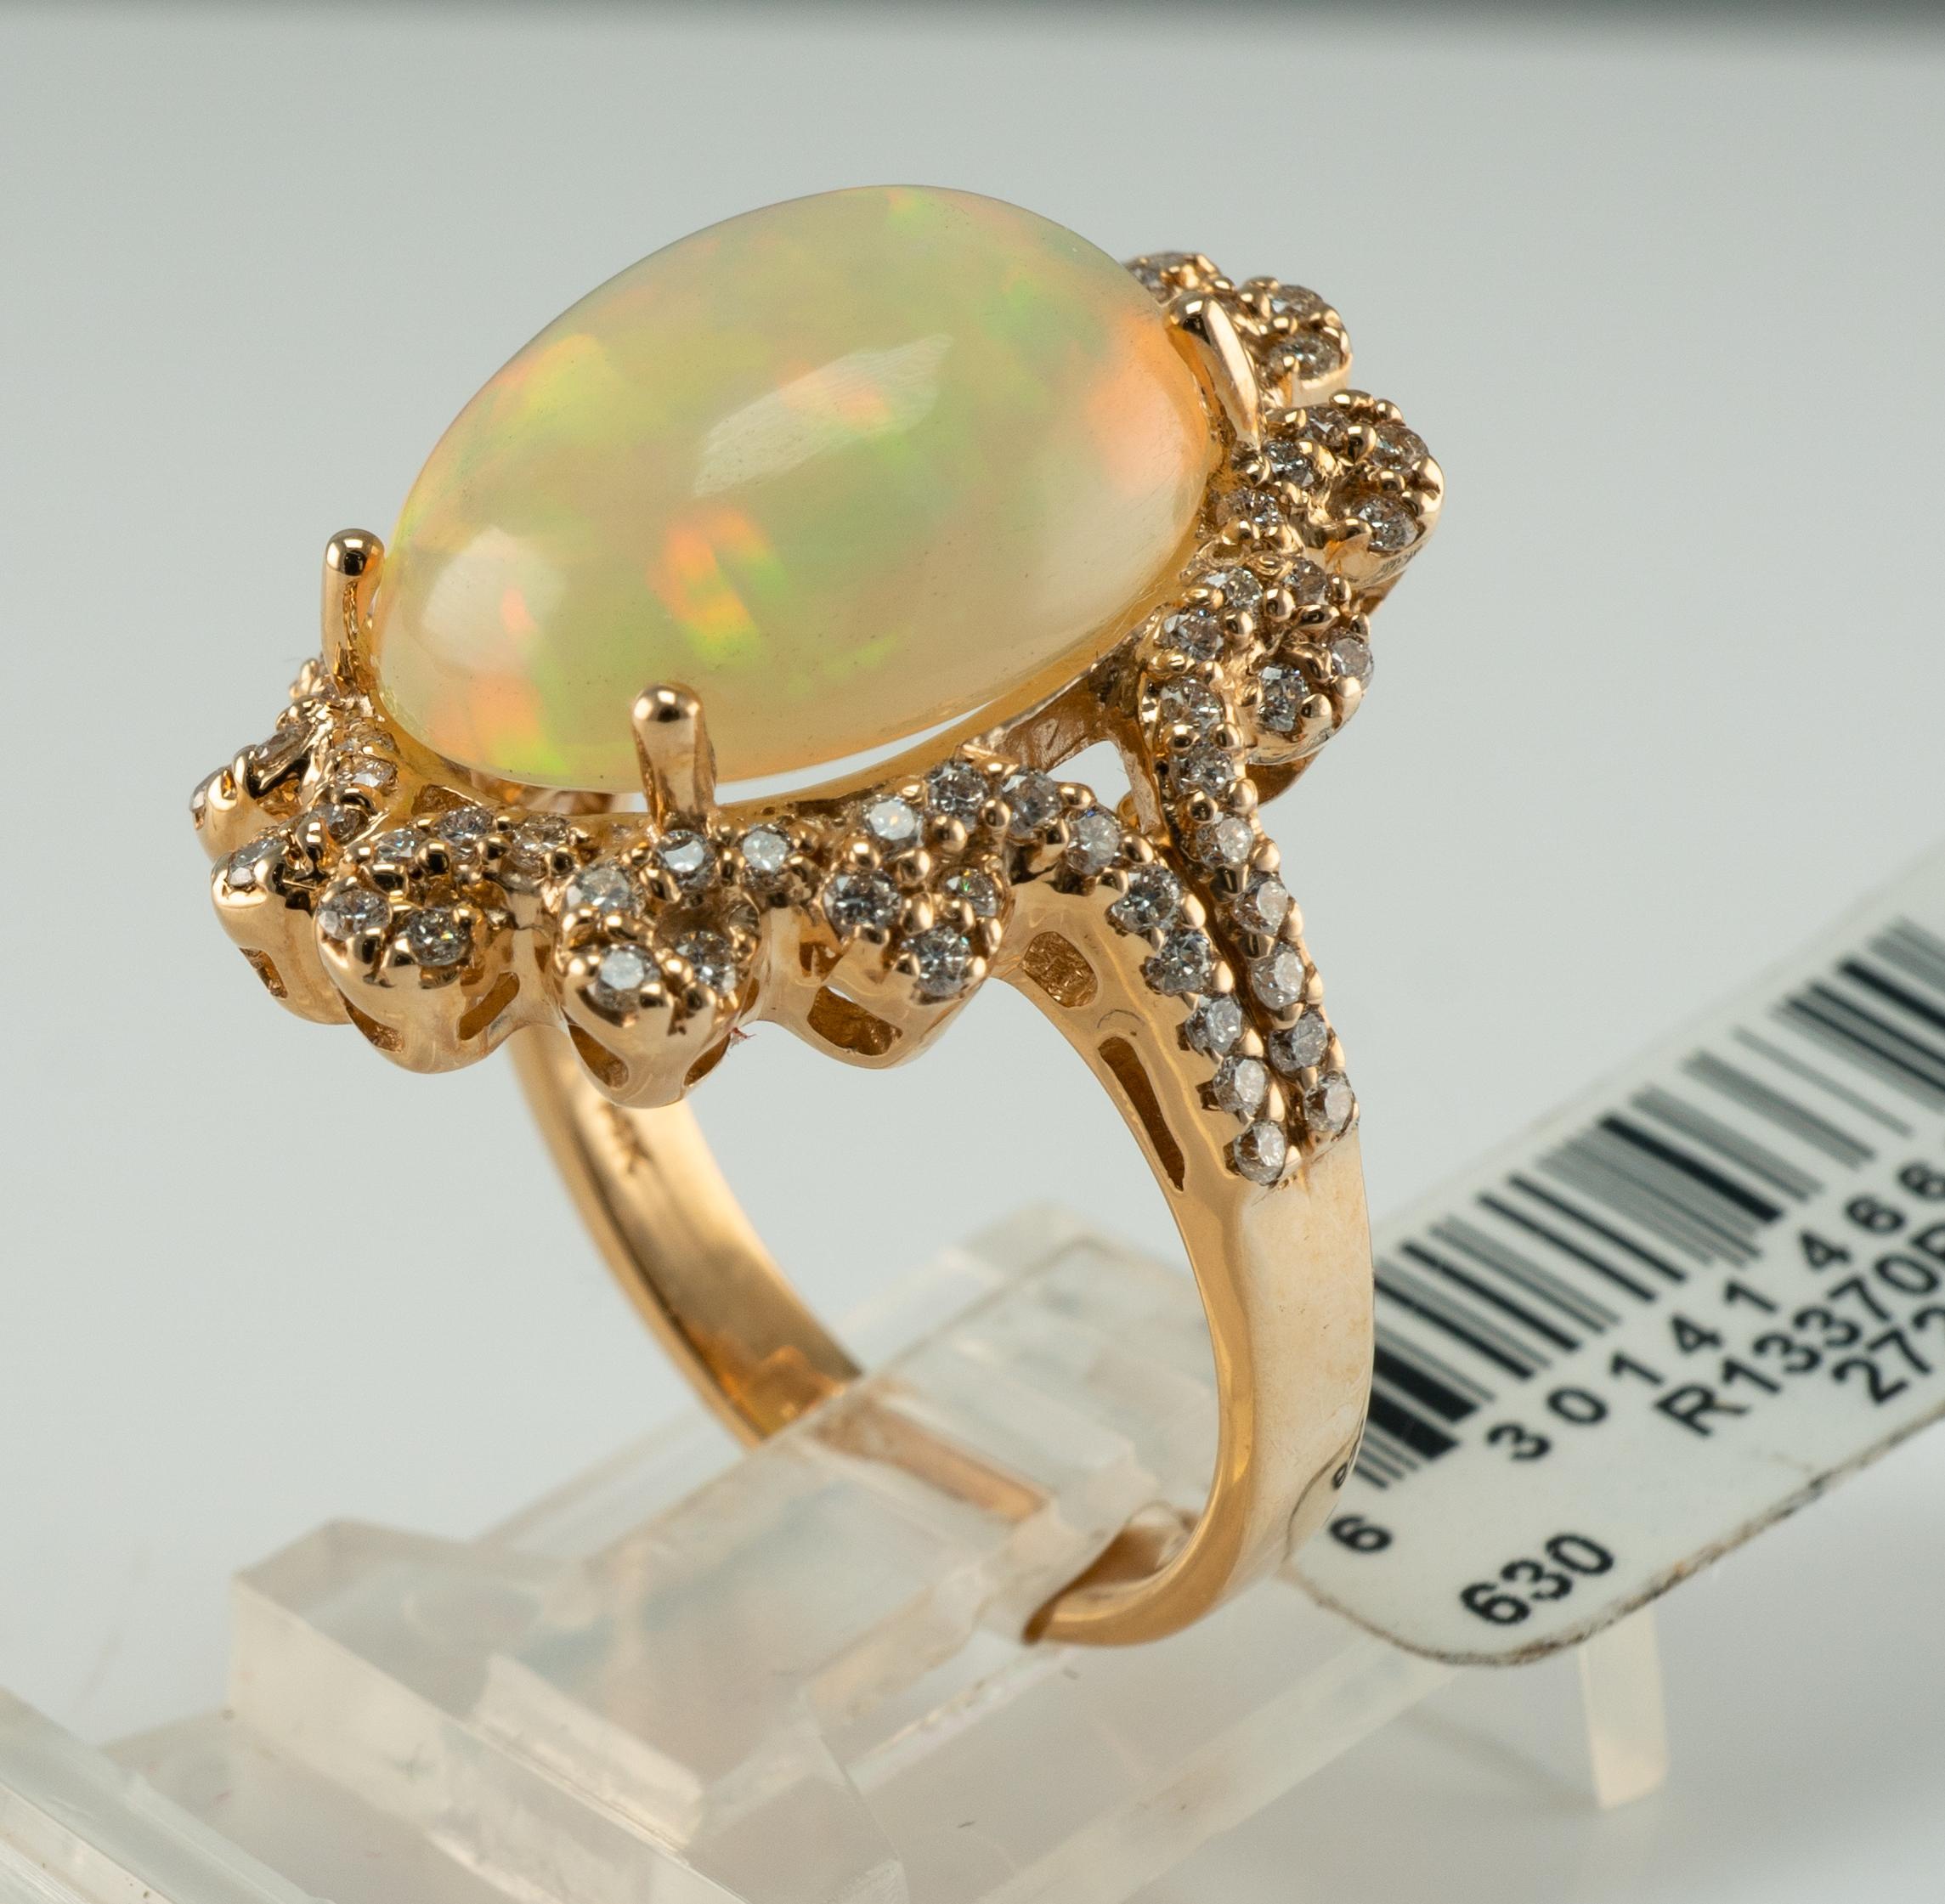 Natural Opal Diamond Ring 14K Gold Estate Retail Tag $8400 For Sale 7